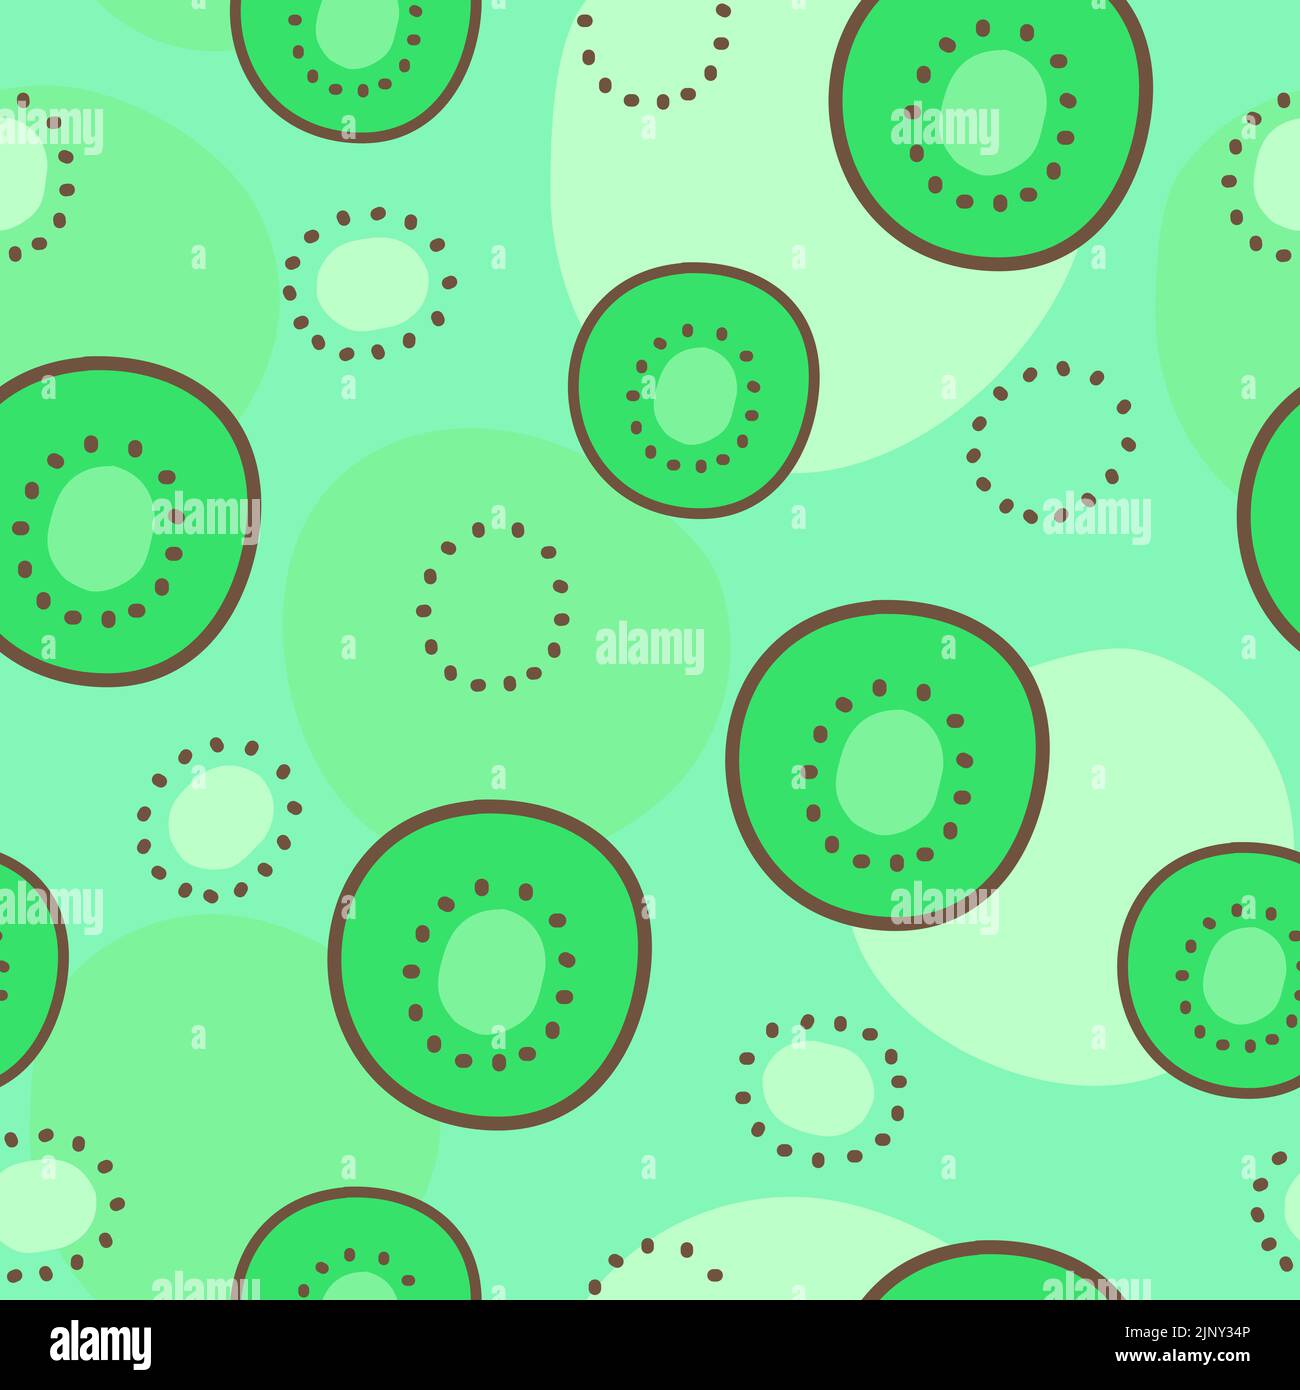 Seamless pattern of kiwi cut into pieces on a green background. Cartoon flat kiwi and sliced seamless pattern. Organic fruit background. Stock Vector